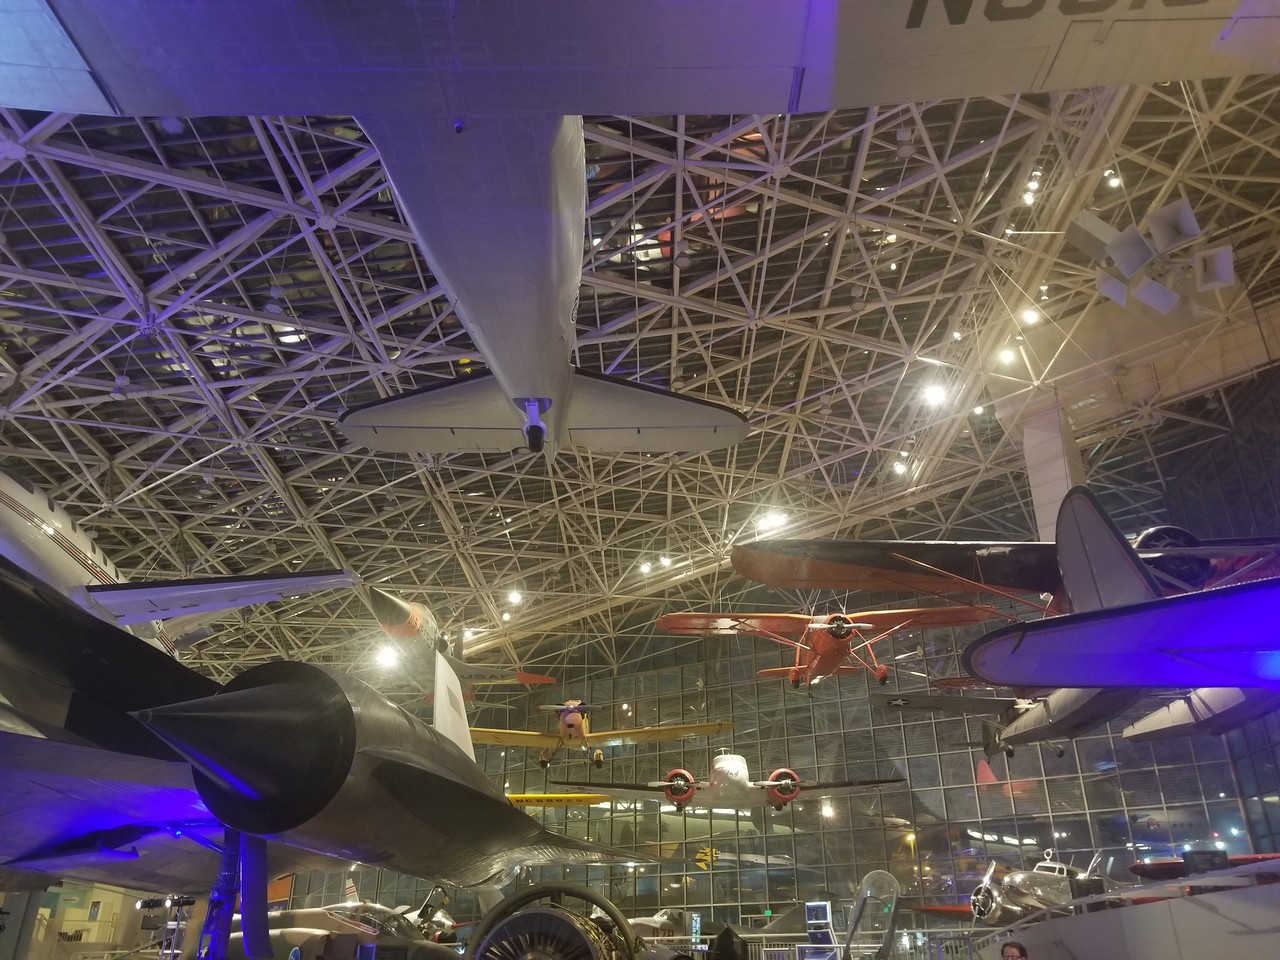 a group of airplanes from a ceiling